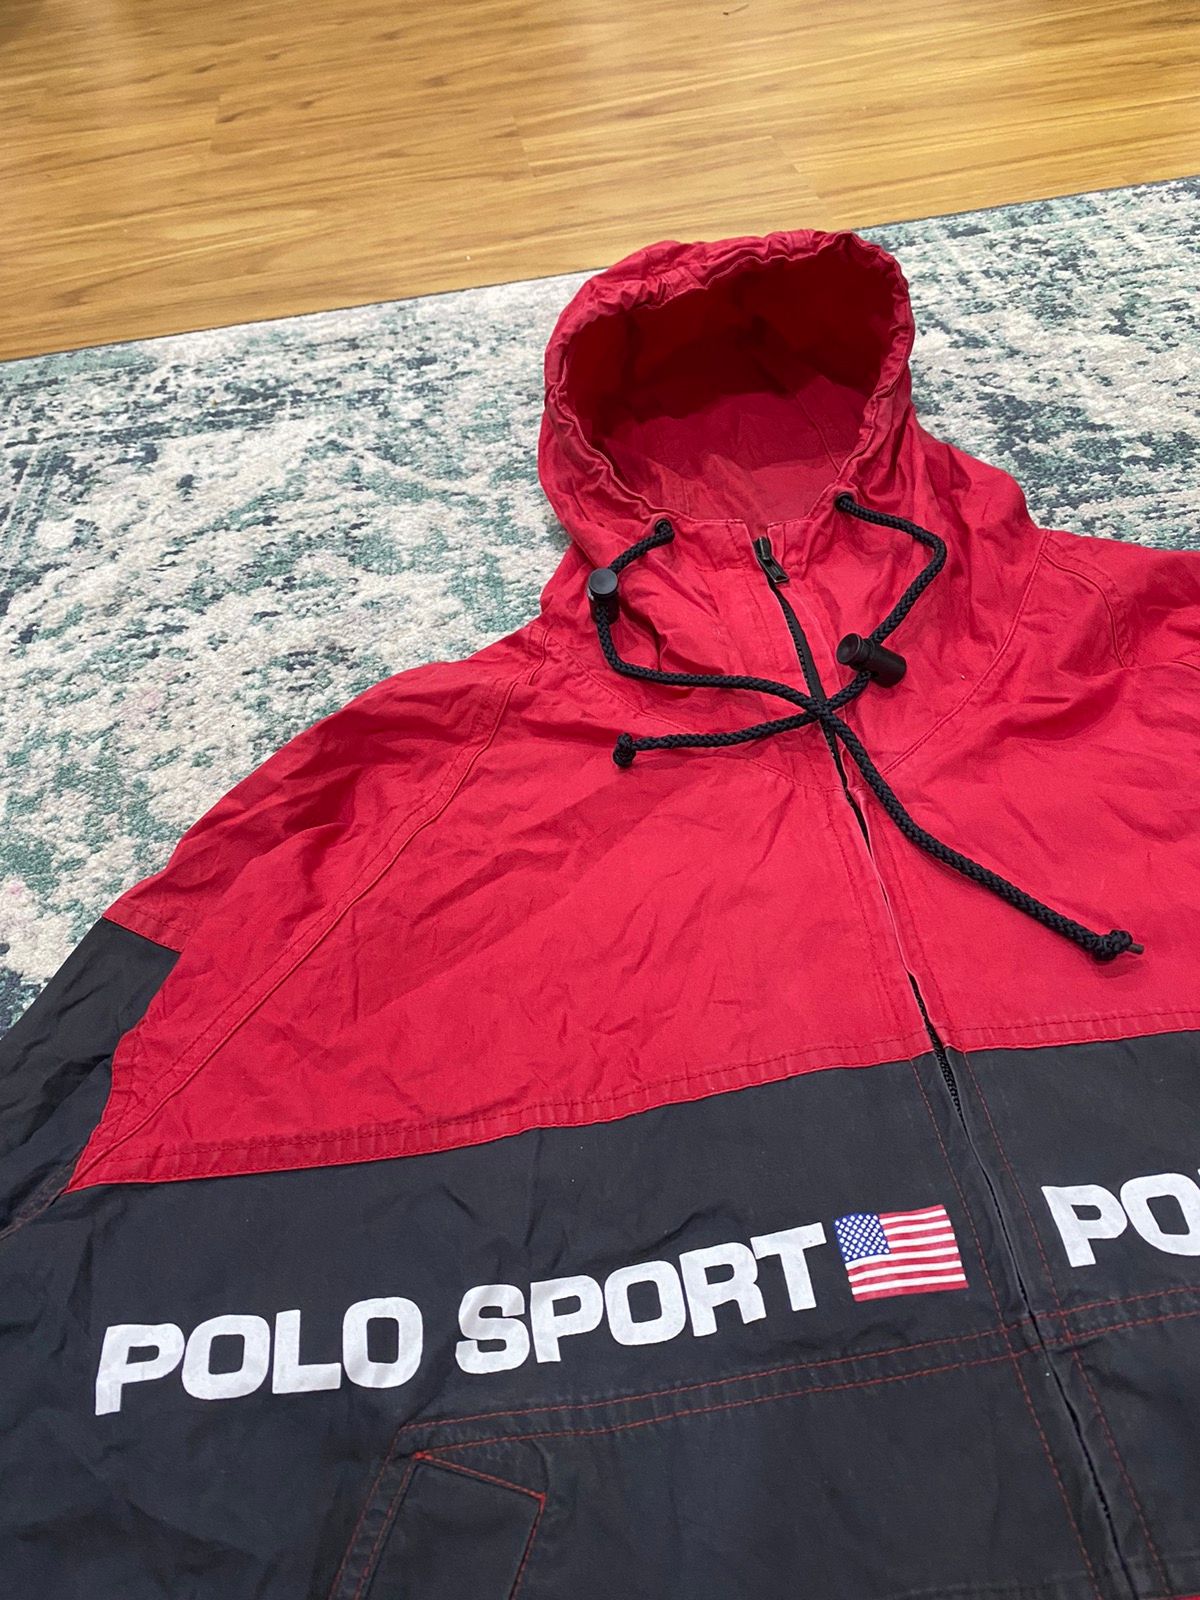 Vintage Polo Sport Ralph Lauren Spell Out Jacket - 3